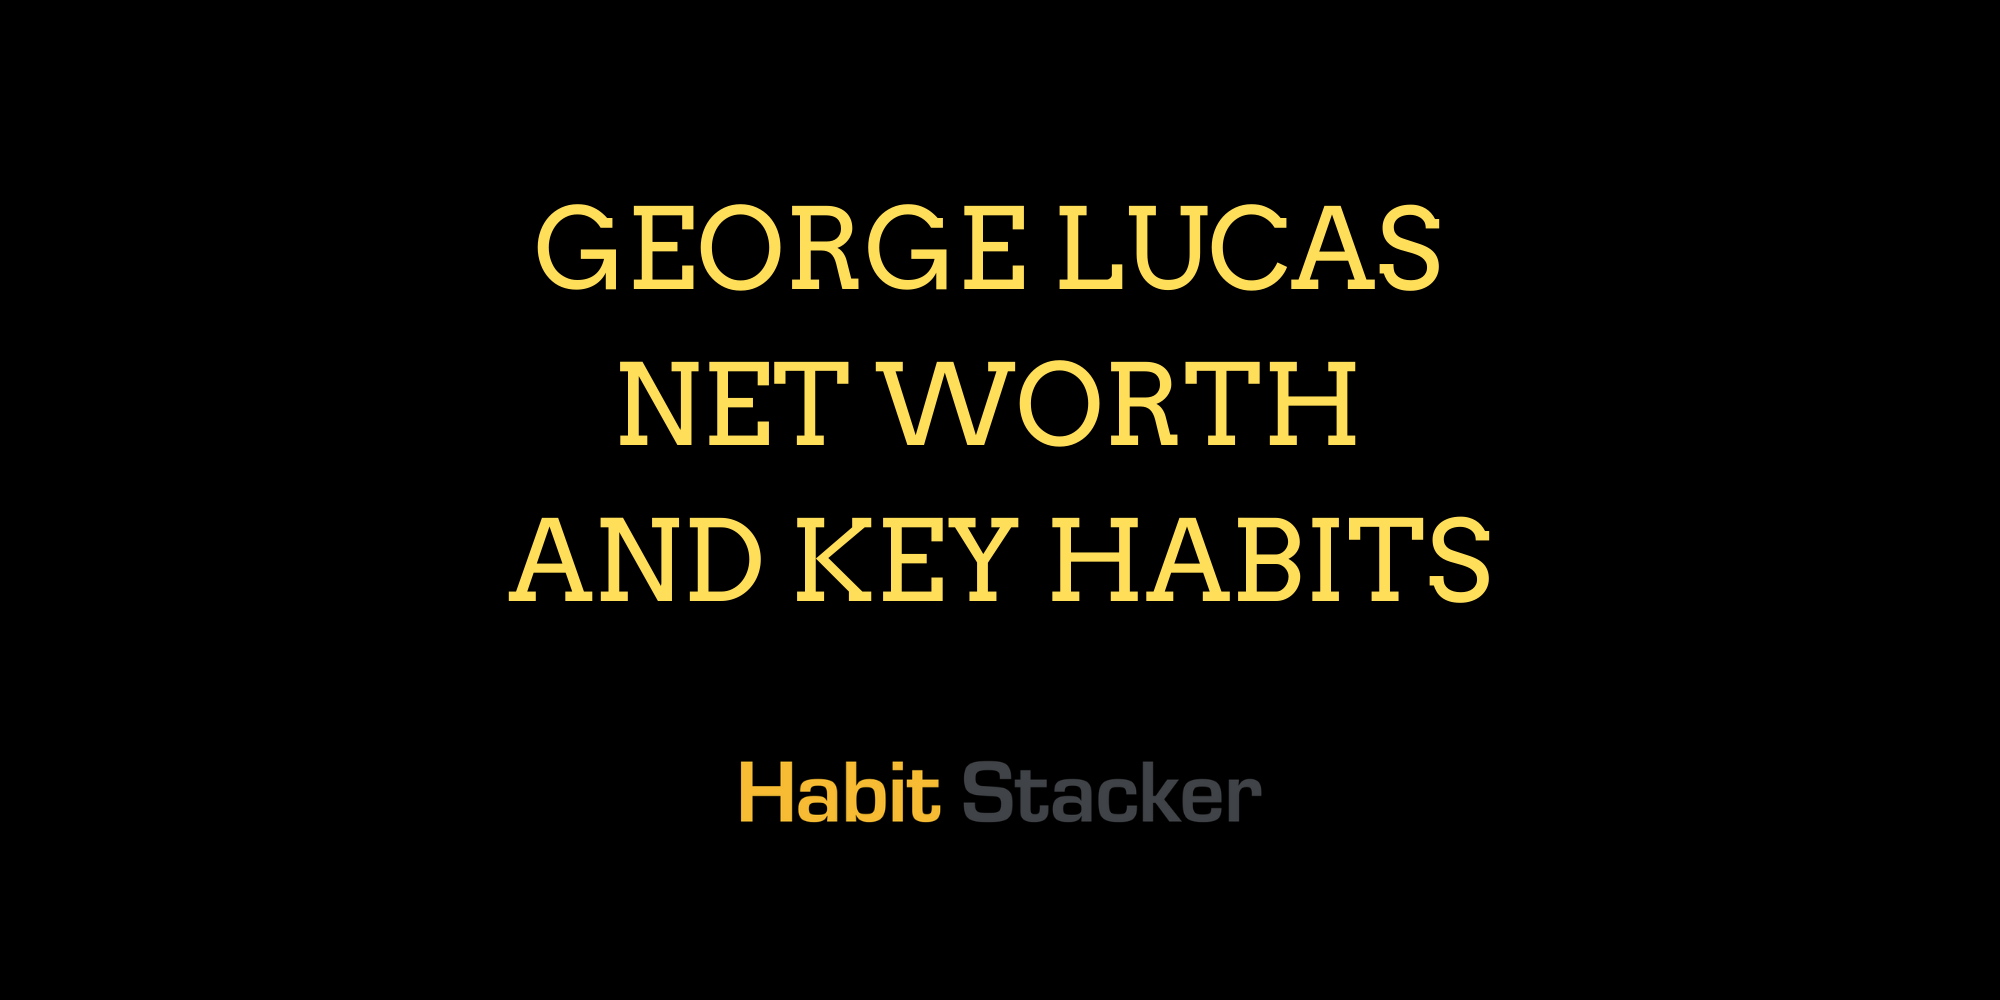 George Lucas Net Worth and Key Habits